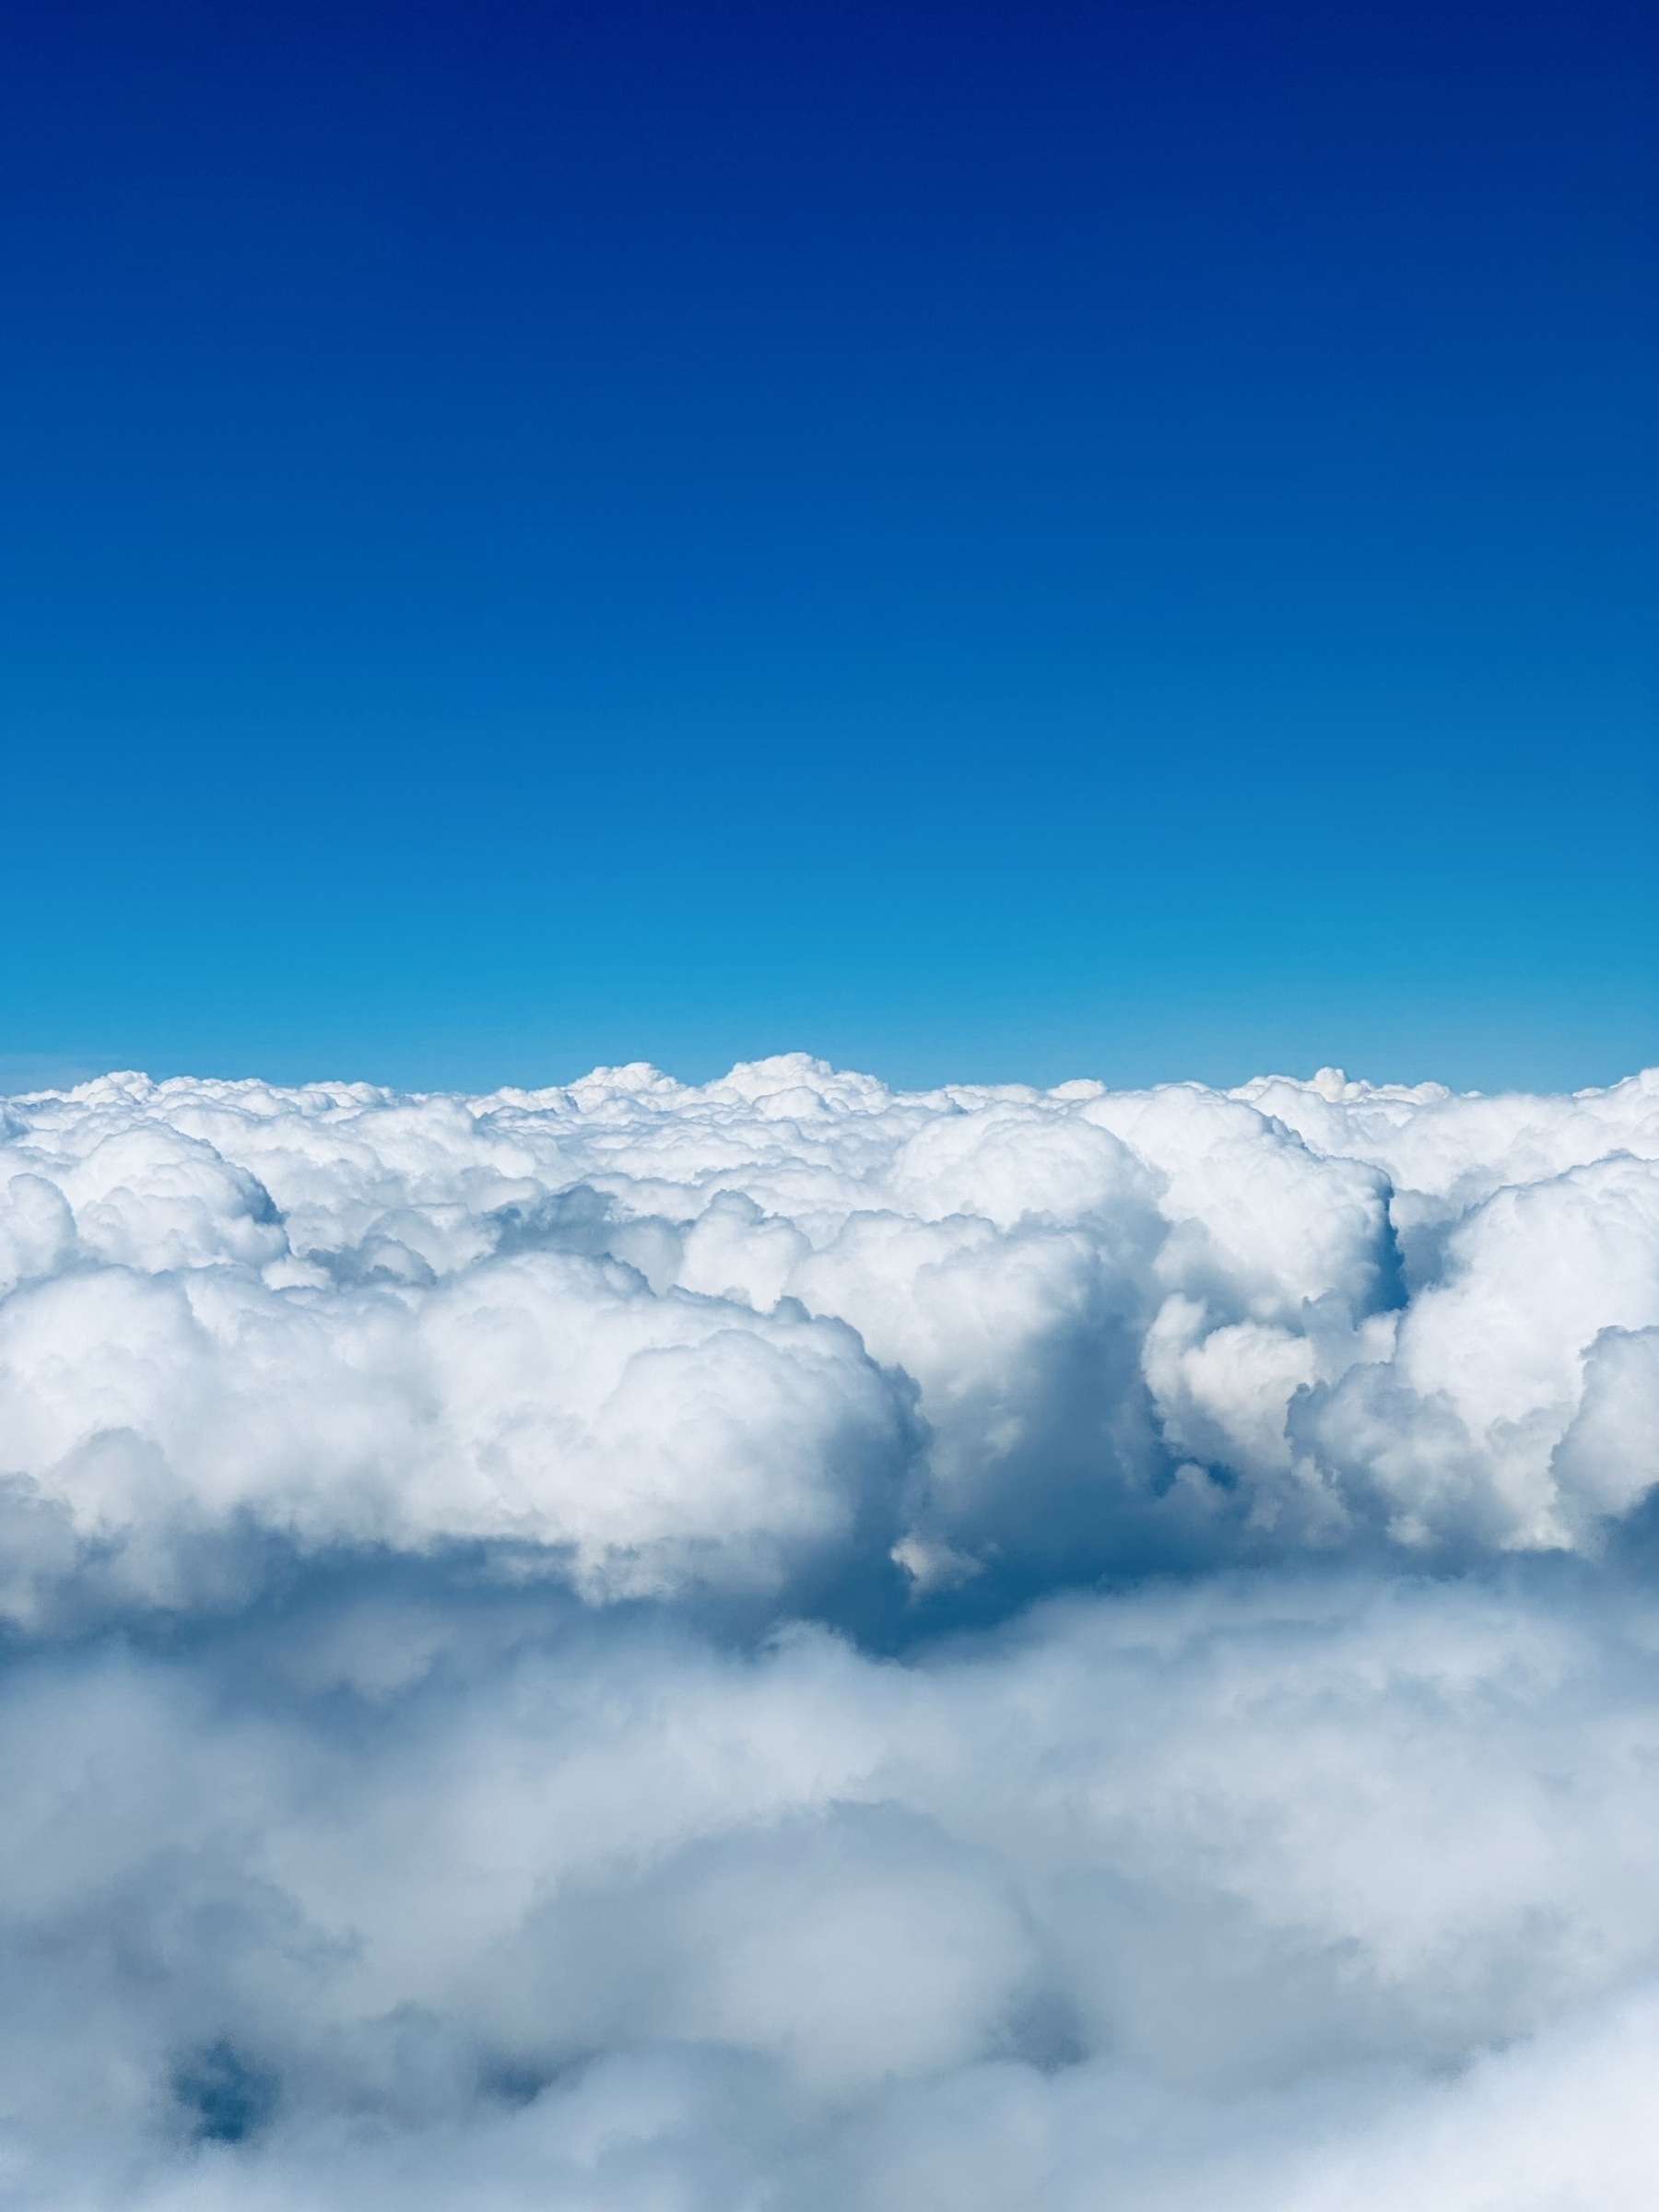 The tops of fluffy white clouds beneath a bright blue sky.